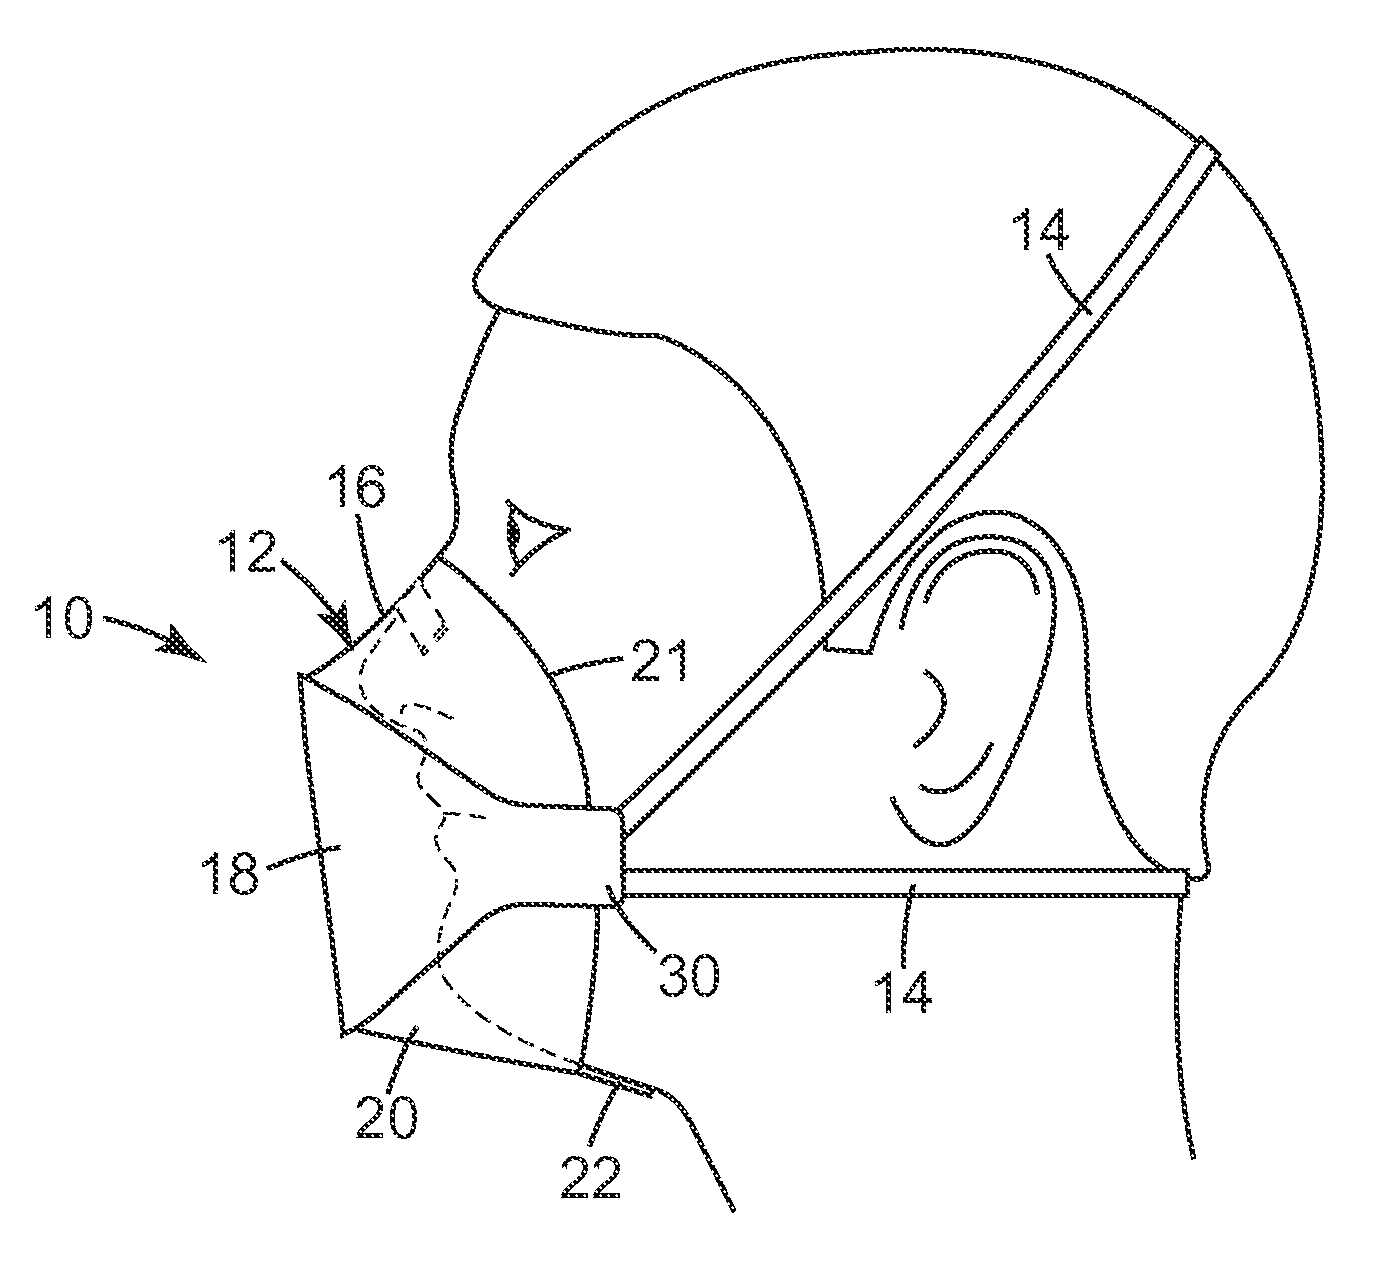 Maintenance-free flat-fold respirator that includes a graspable tab